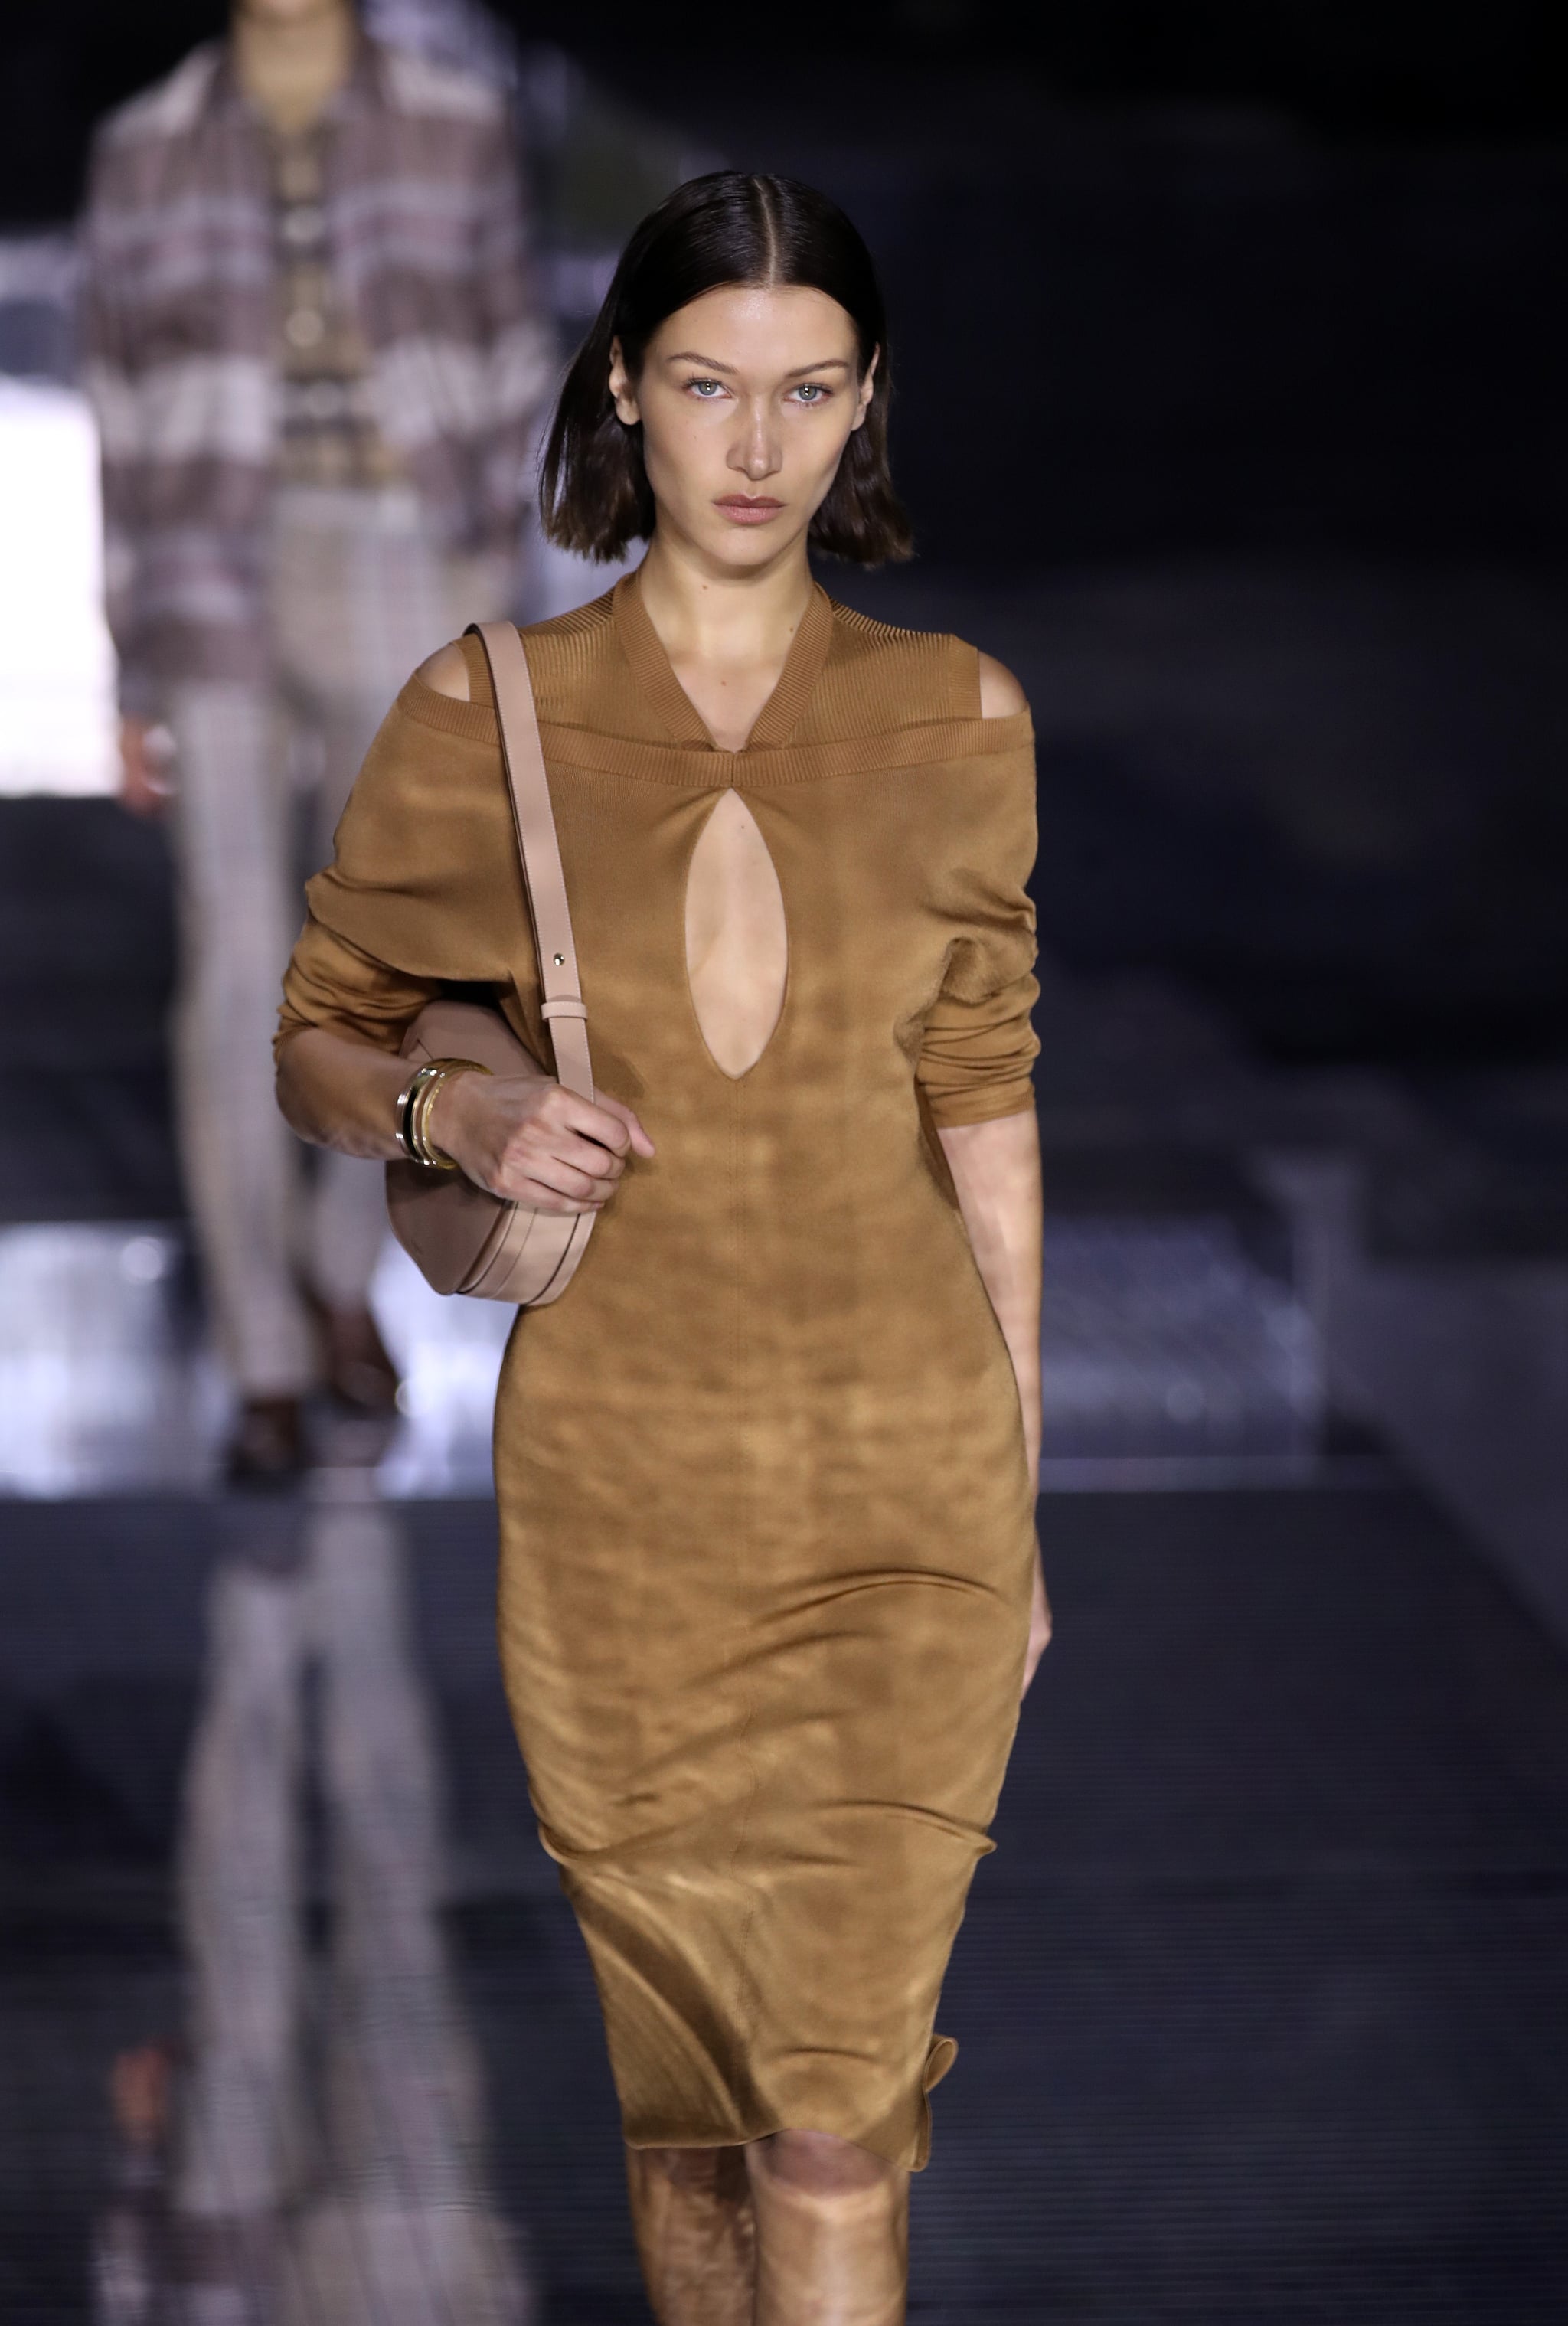 LONDON, ENGLAND - FEBRUARY 17:  Bella Hadid walks the runway at the Burberry  show during London Fashion Week February 2020 on February 17, 2020 in London, England. (Photo by Mike Marsland/WireImage)